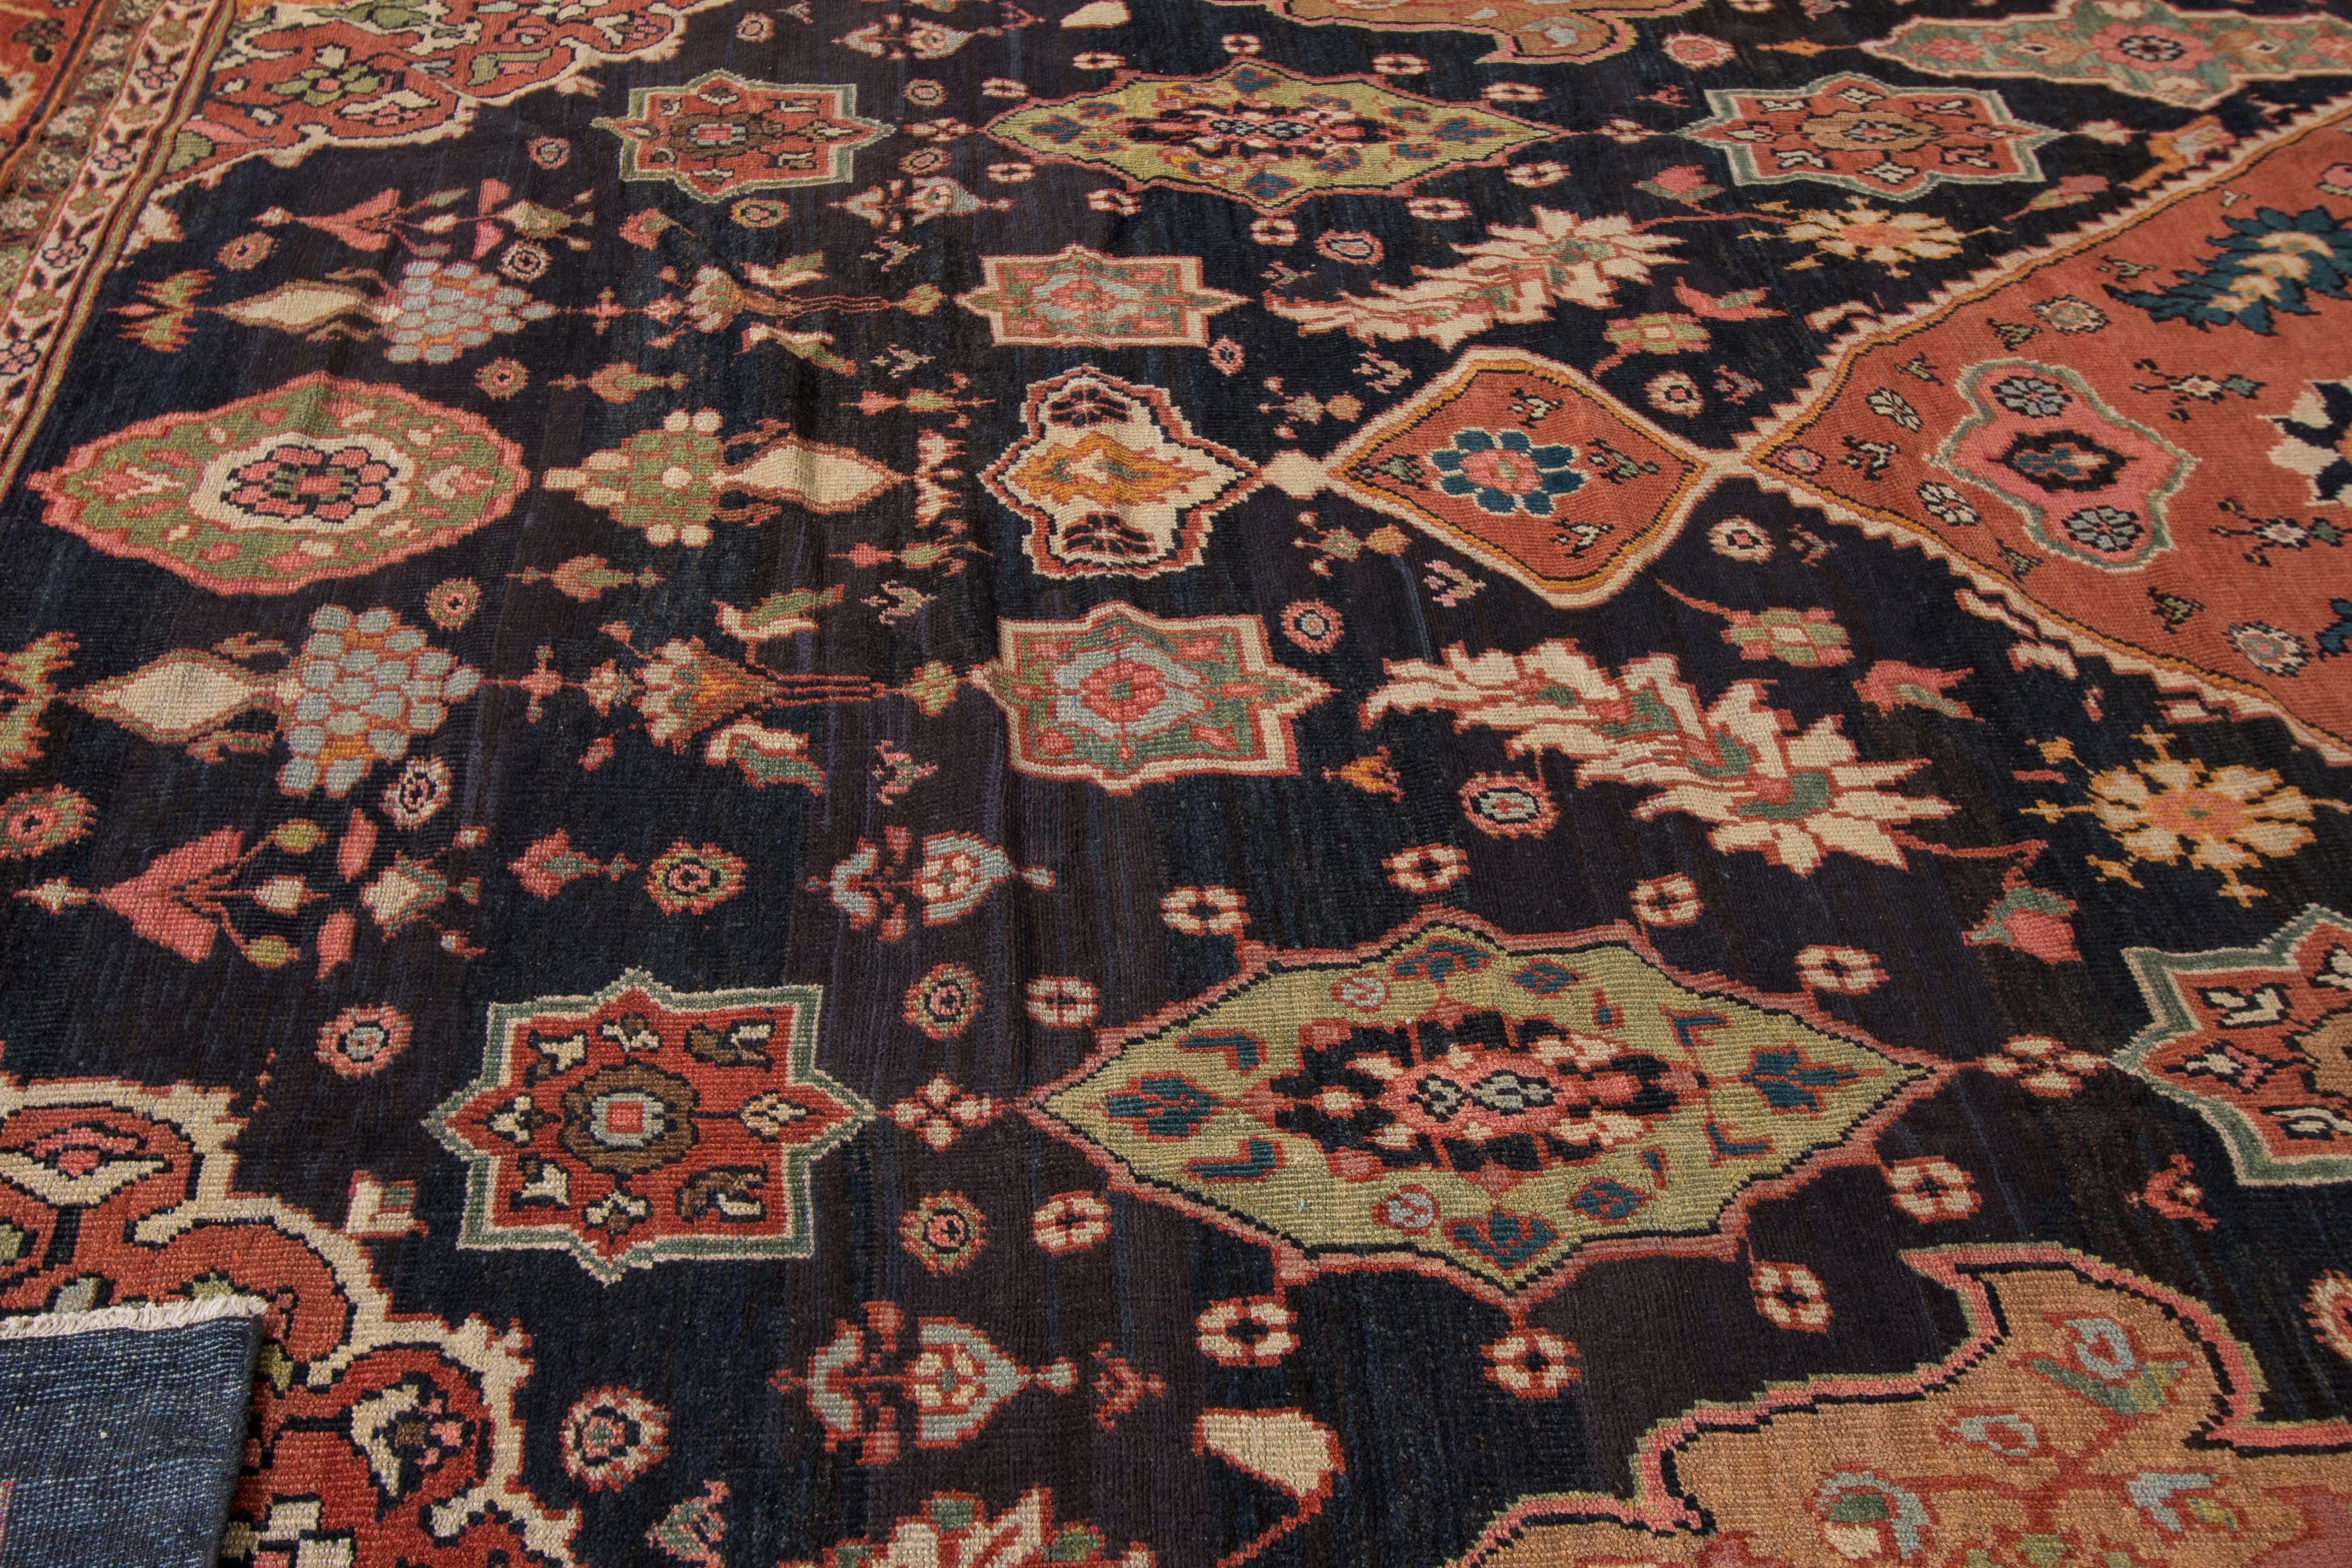 Simply Beautiful Antique Persian Mahal Rug In Excellent Condition For Sale In Norwalk, CT